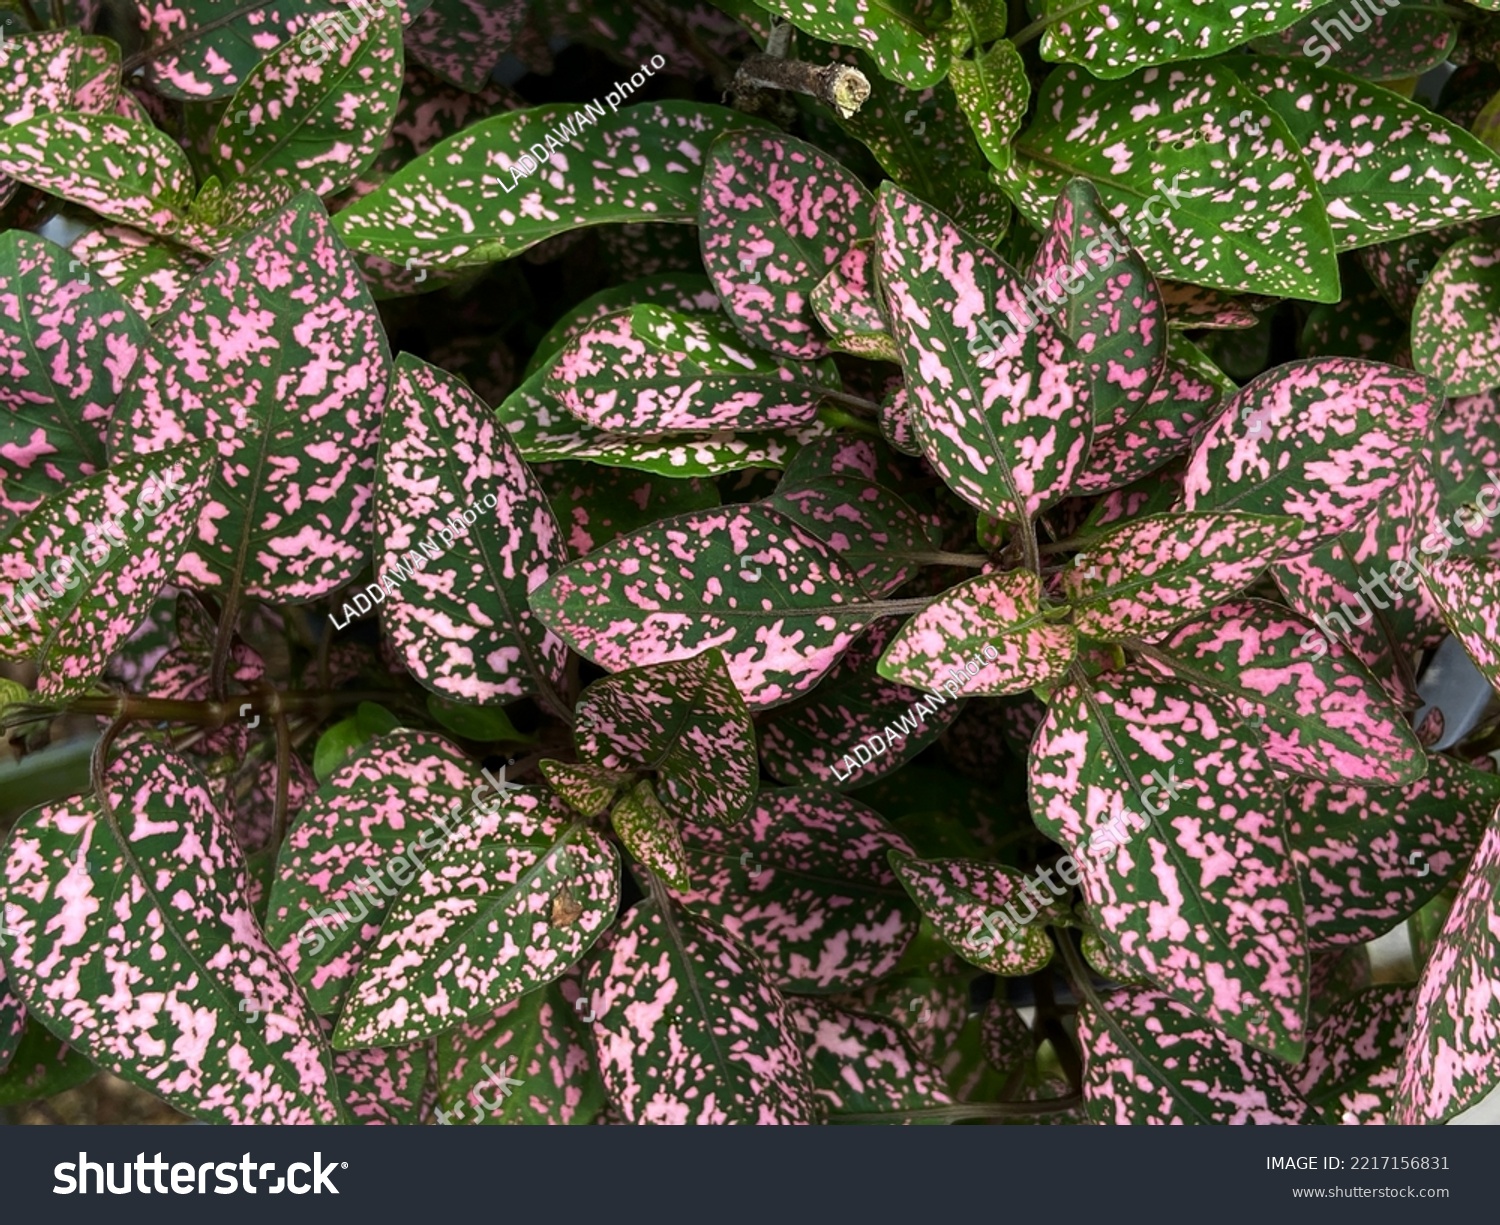 Close up beautiful leaves texture with pink and green color of Polka Dot Plant, Hypoestes phyllostachya, in the garden. Tropical foliage plant.  #2217156831